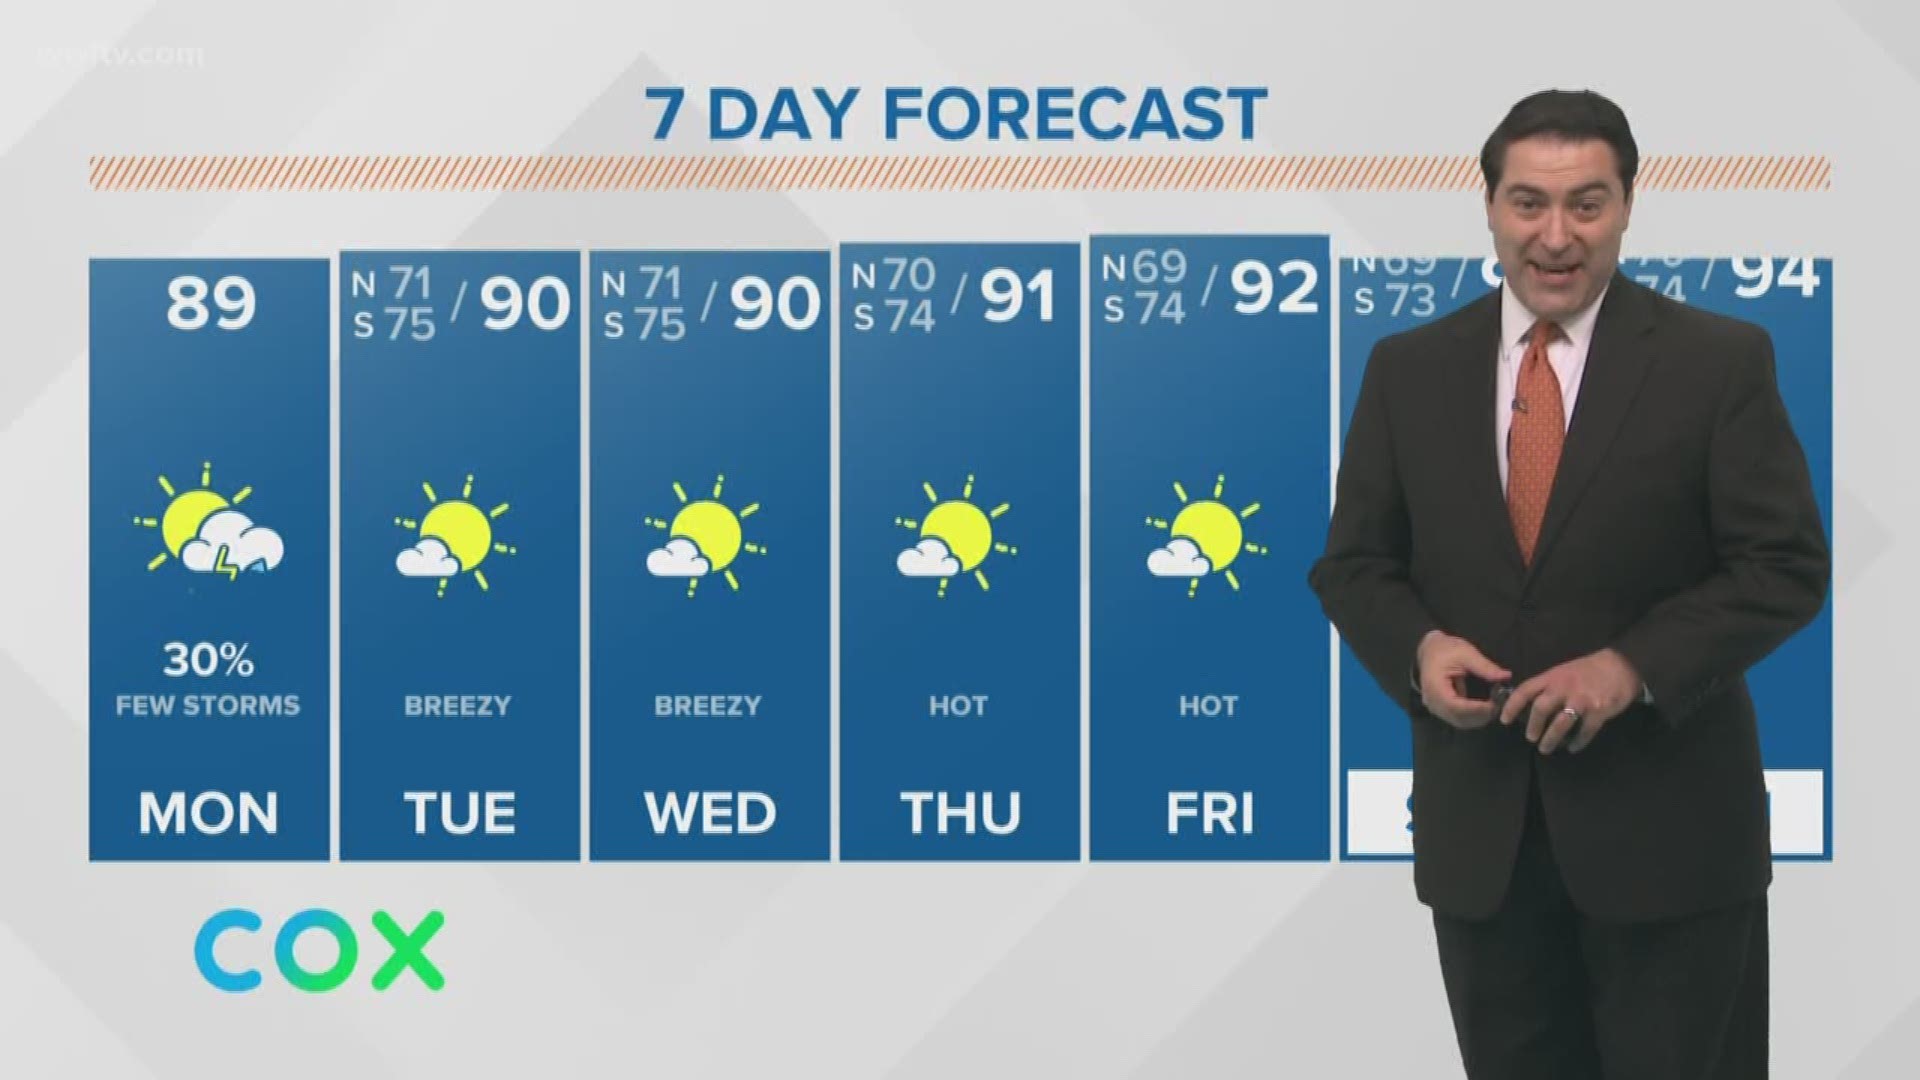 Meteorologist Dave Nussbaum says it will be hot and humid with spotty storms today across the New Orleans area. Then we will be hot with no rain the rest of the week.